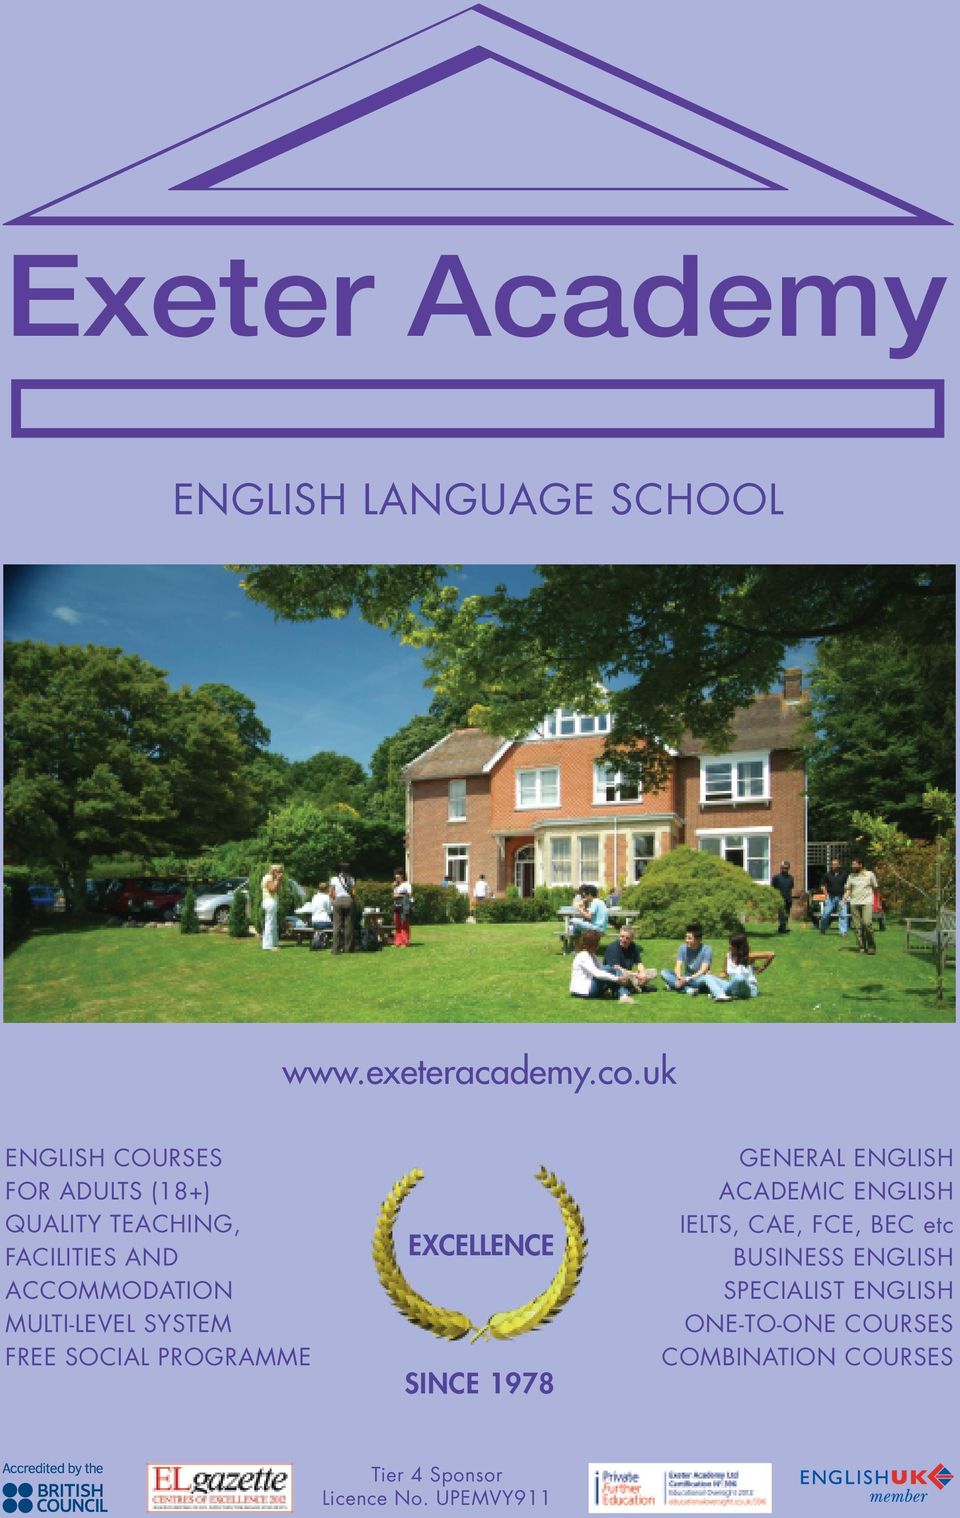 MULTI-LEVEL SYSTEM FREE SOCIAL PROGRAMME EXCELLENCE SINCE 1978 GENERAL ENGLISH ACADEMIC